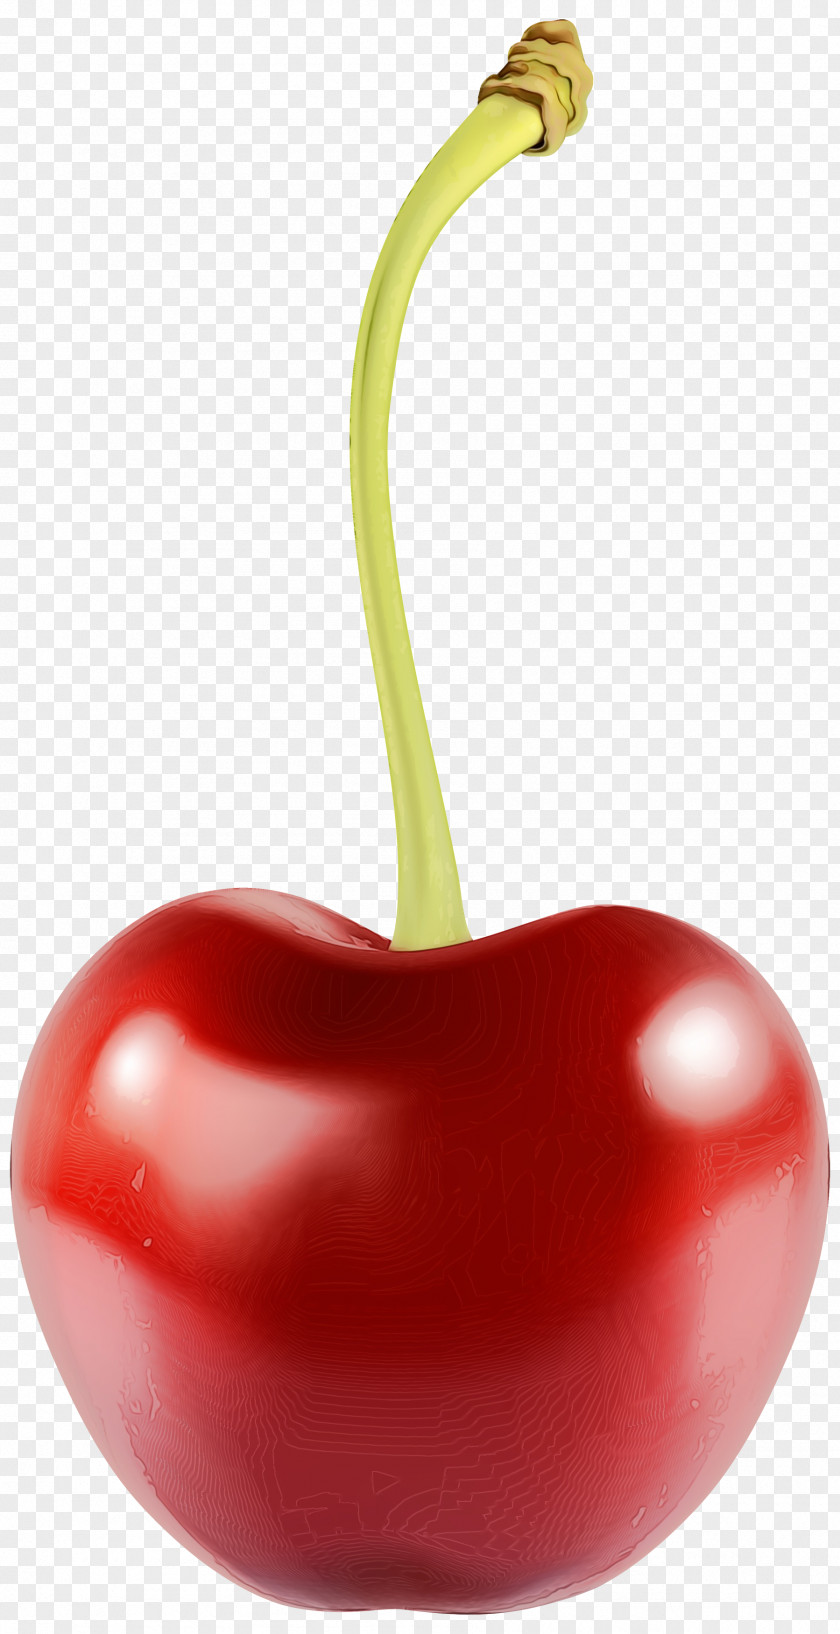 Vegetable Bell Peppers And Chili Cherry Natural Foods Red Fruit Plant PNG